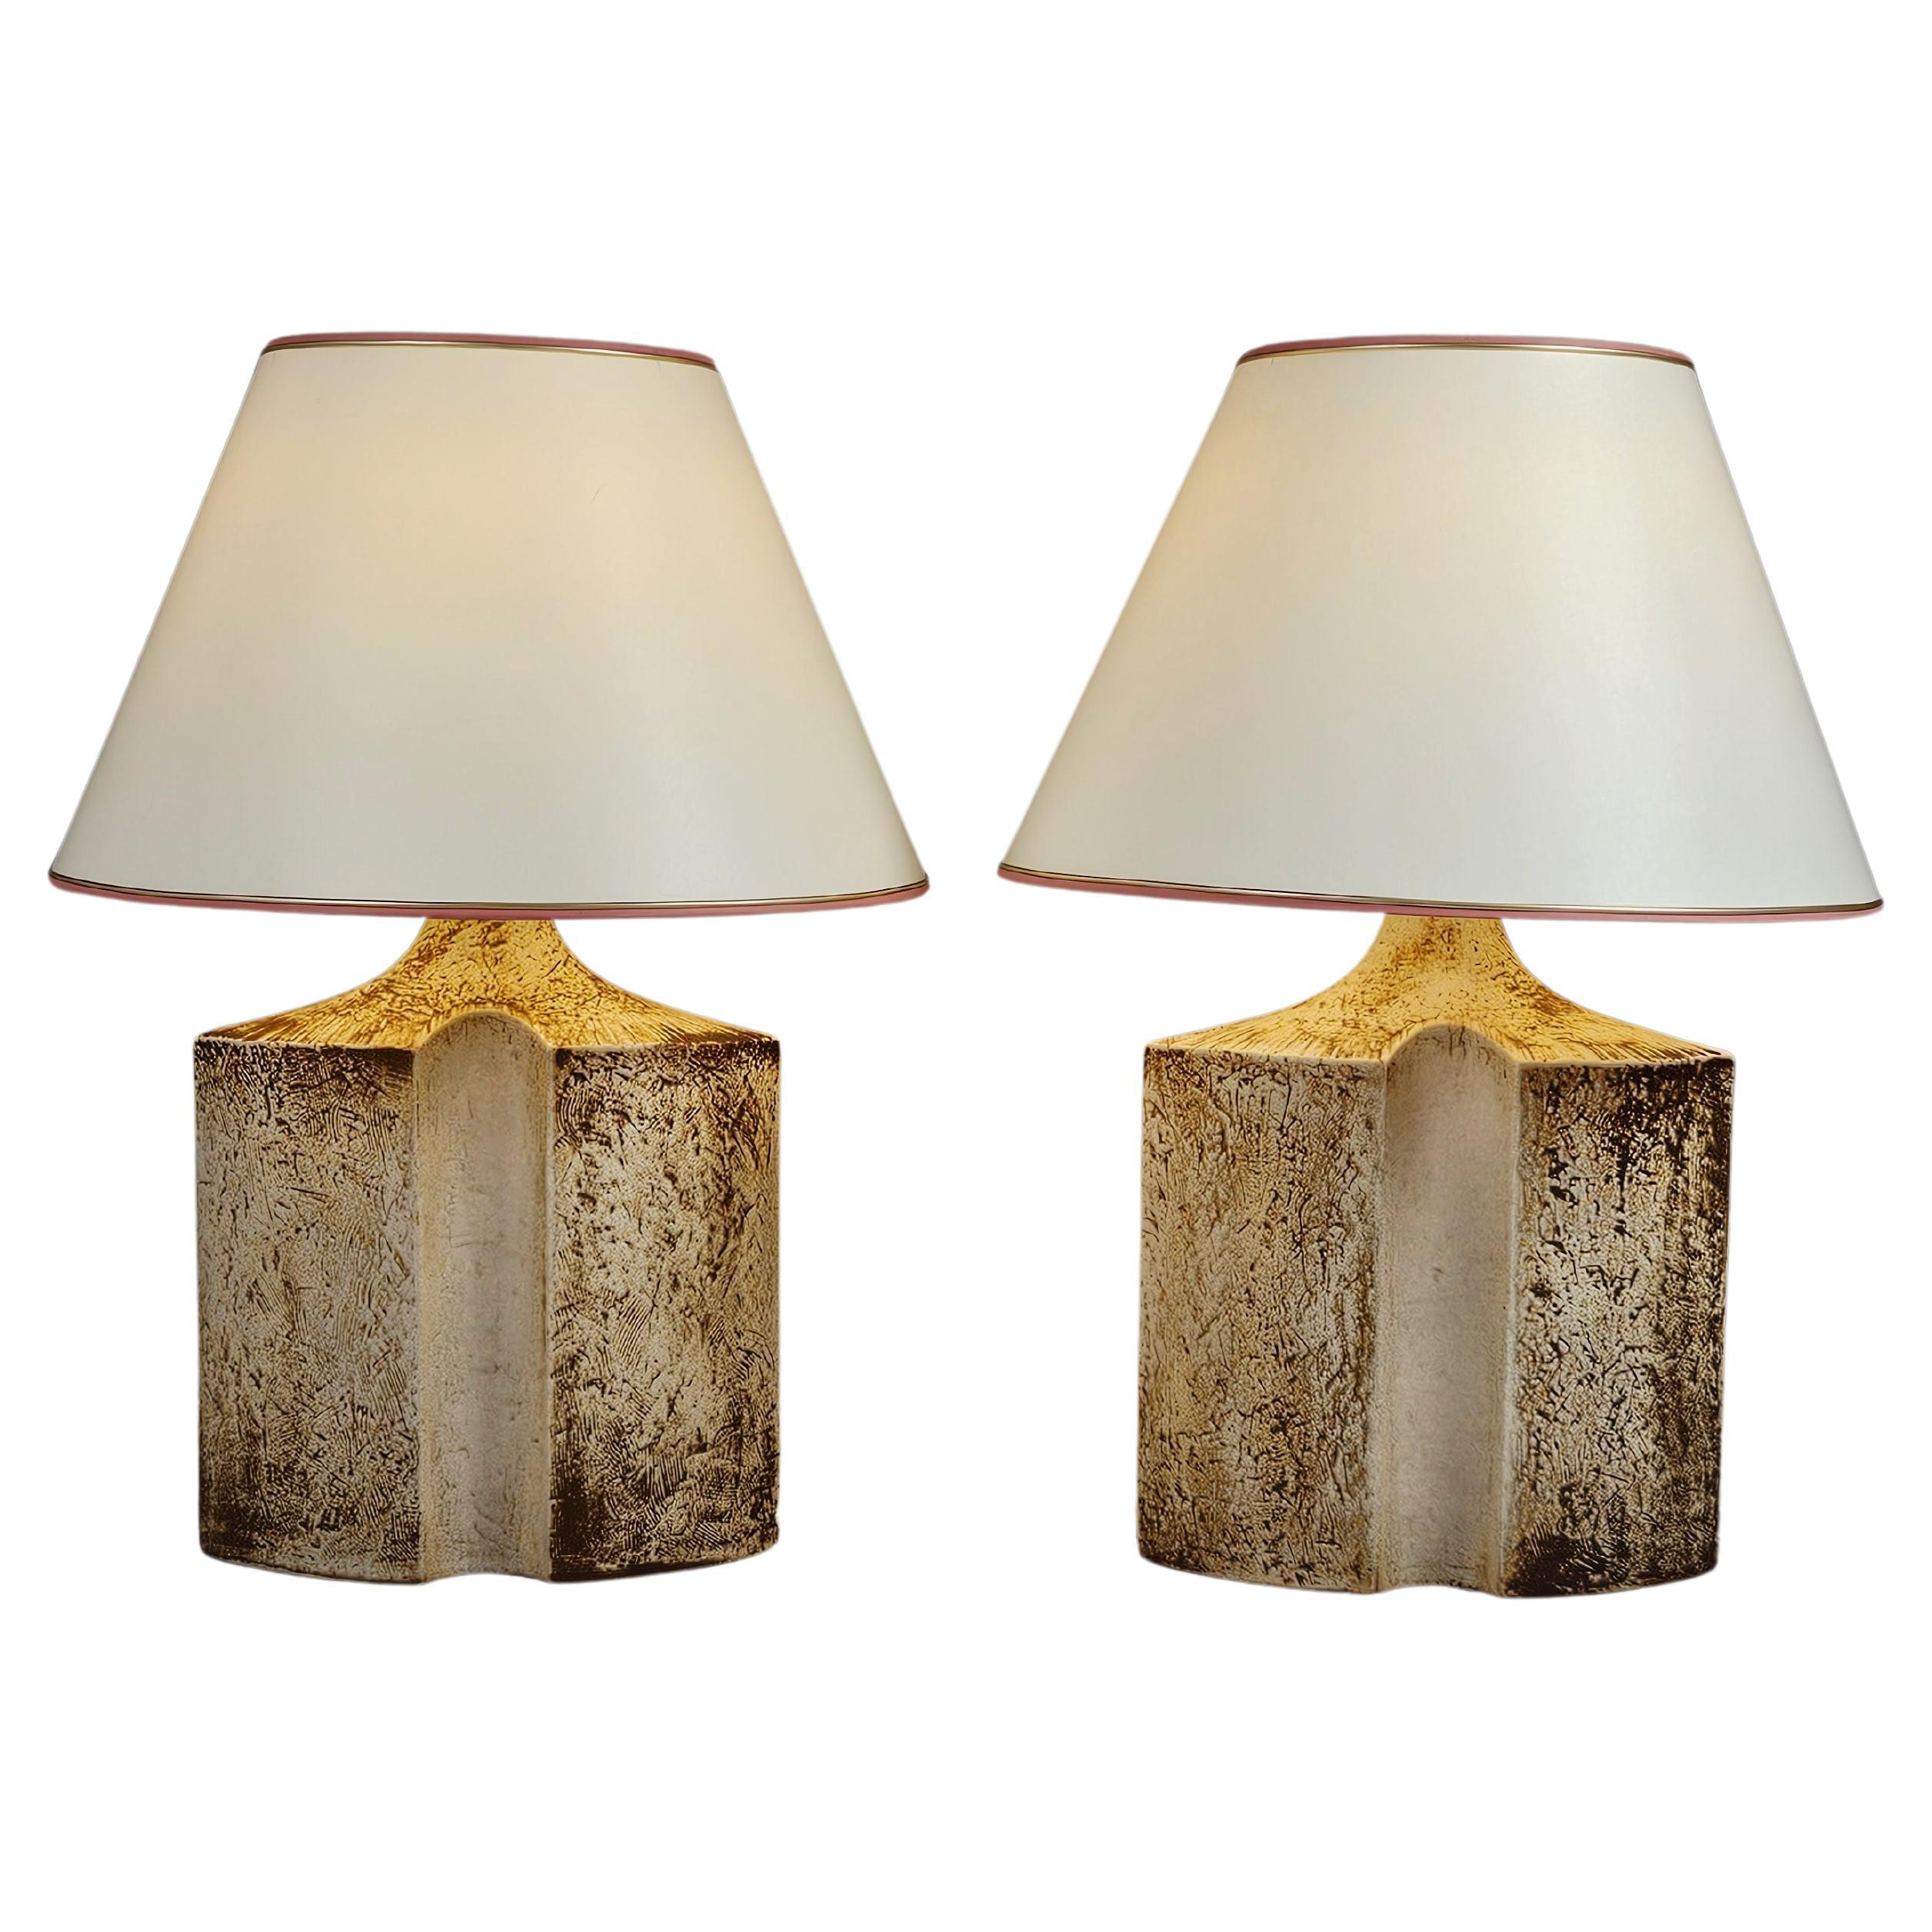 Big stoneware table lamps by Haico Nitzsche for Søholm Stentøj, Denmark, 1960s For Sale